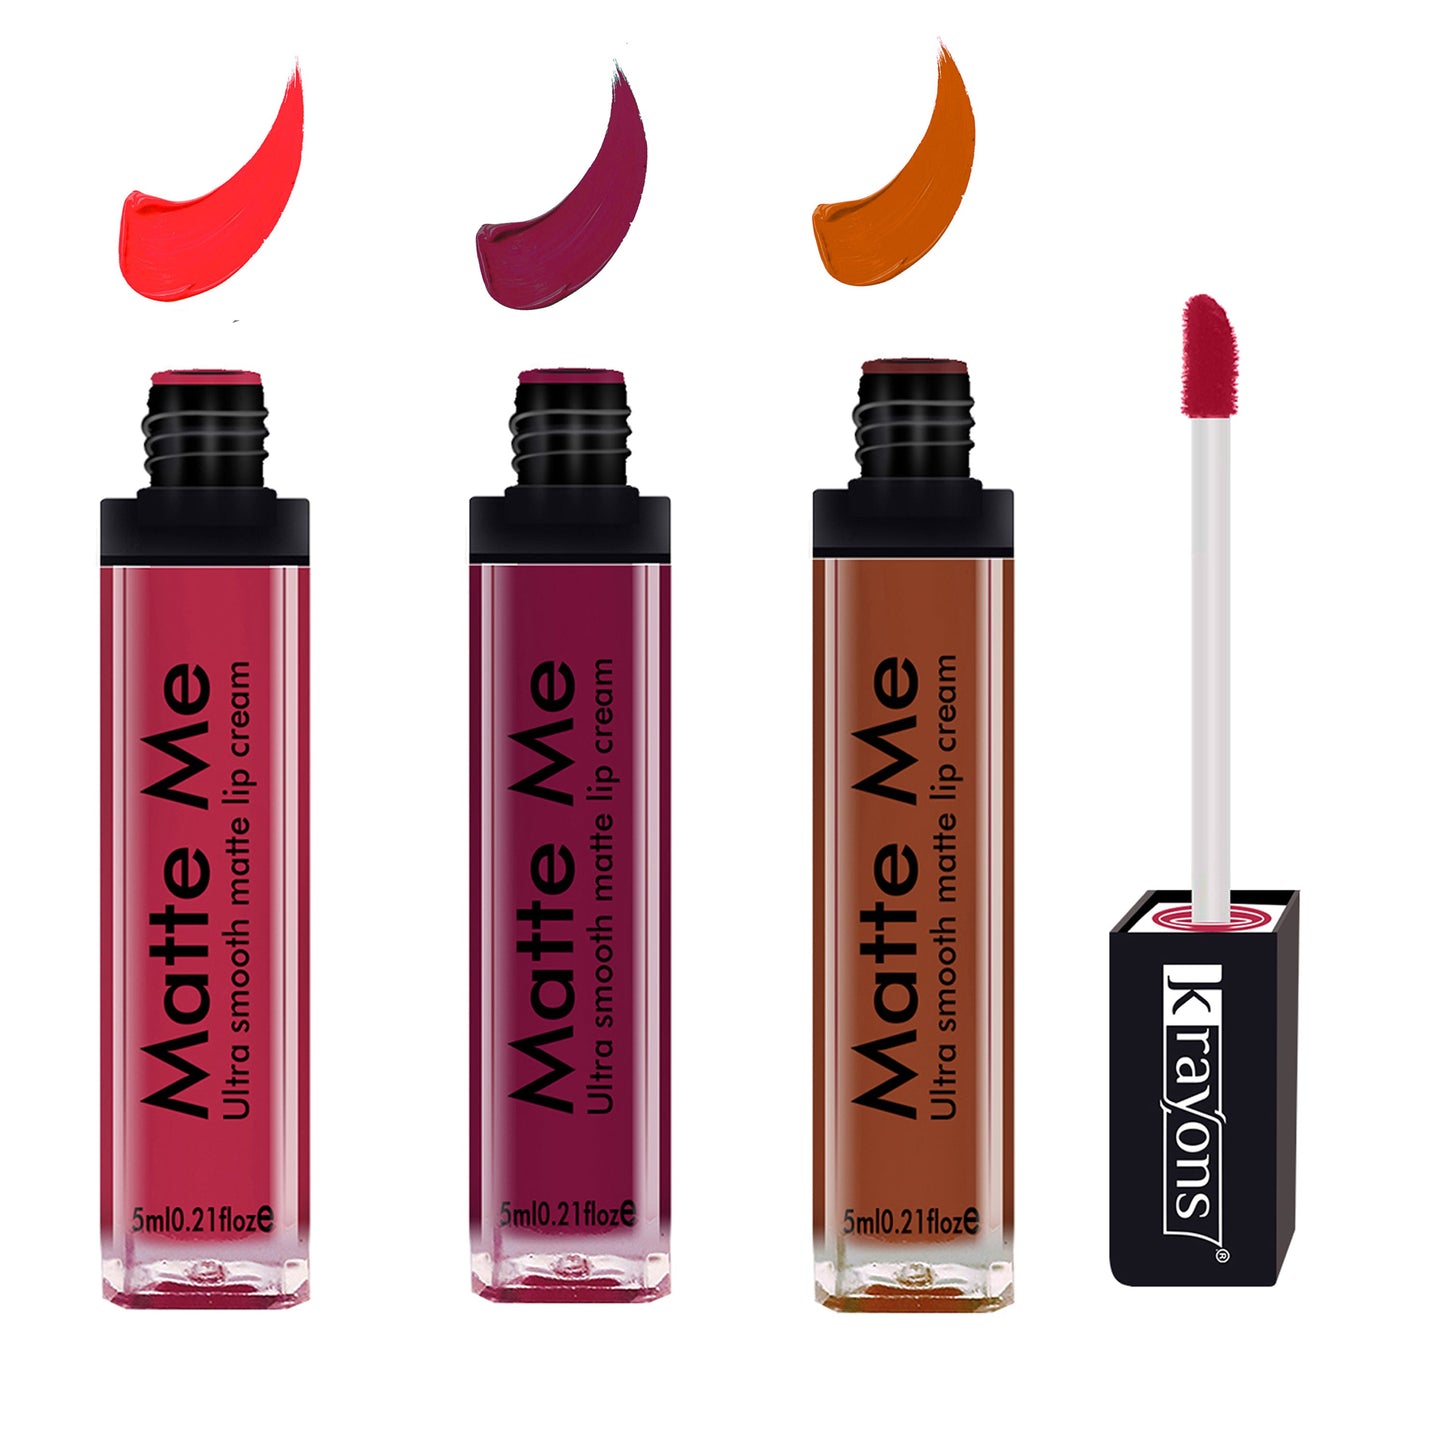 Krayons Matte Me Ultra Smooth Matte Liquid Lip Color, Mask Proof, Waterproof, Longlasting, 5ml Each, Combo, Pack of 3 (Sunset Orange, Wow Pink, Coffee Creme)